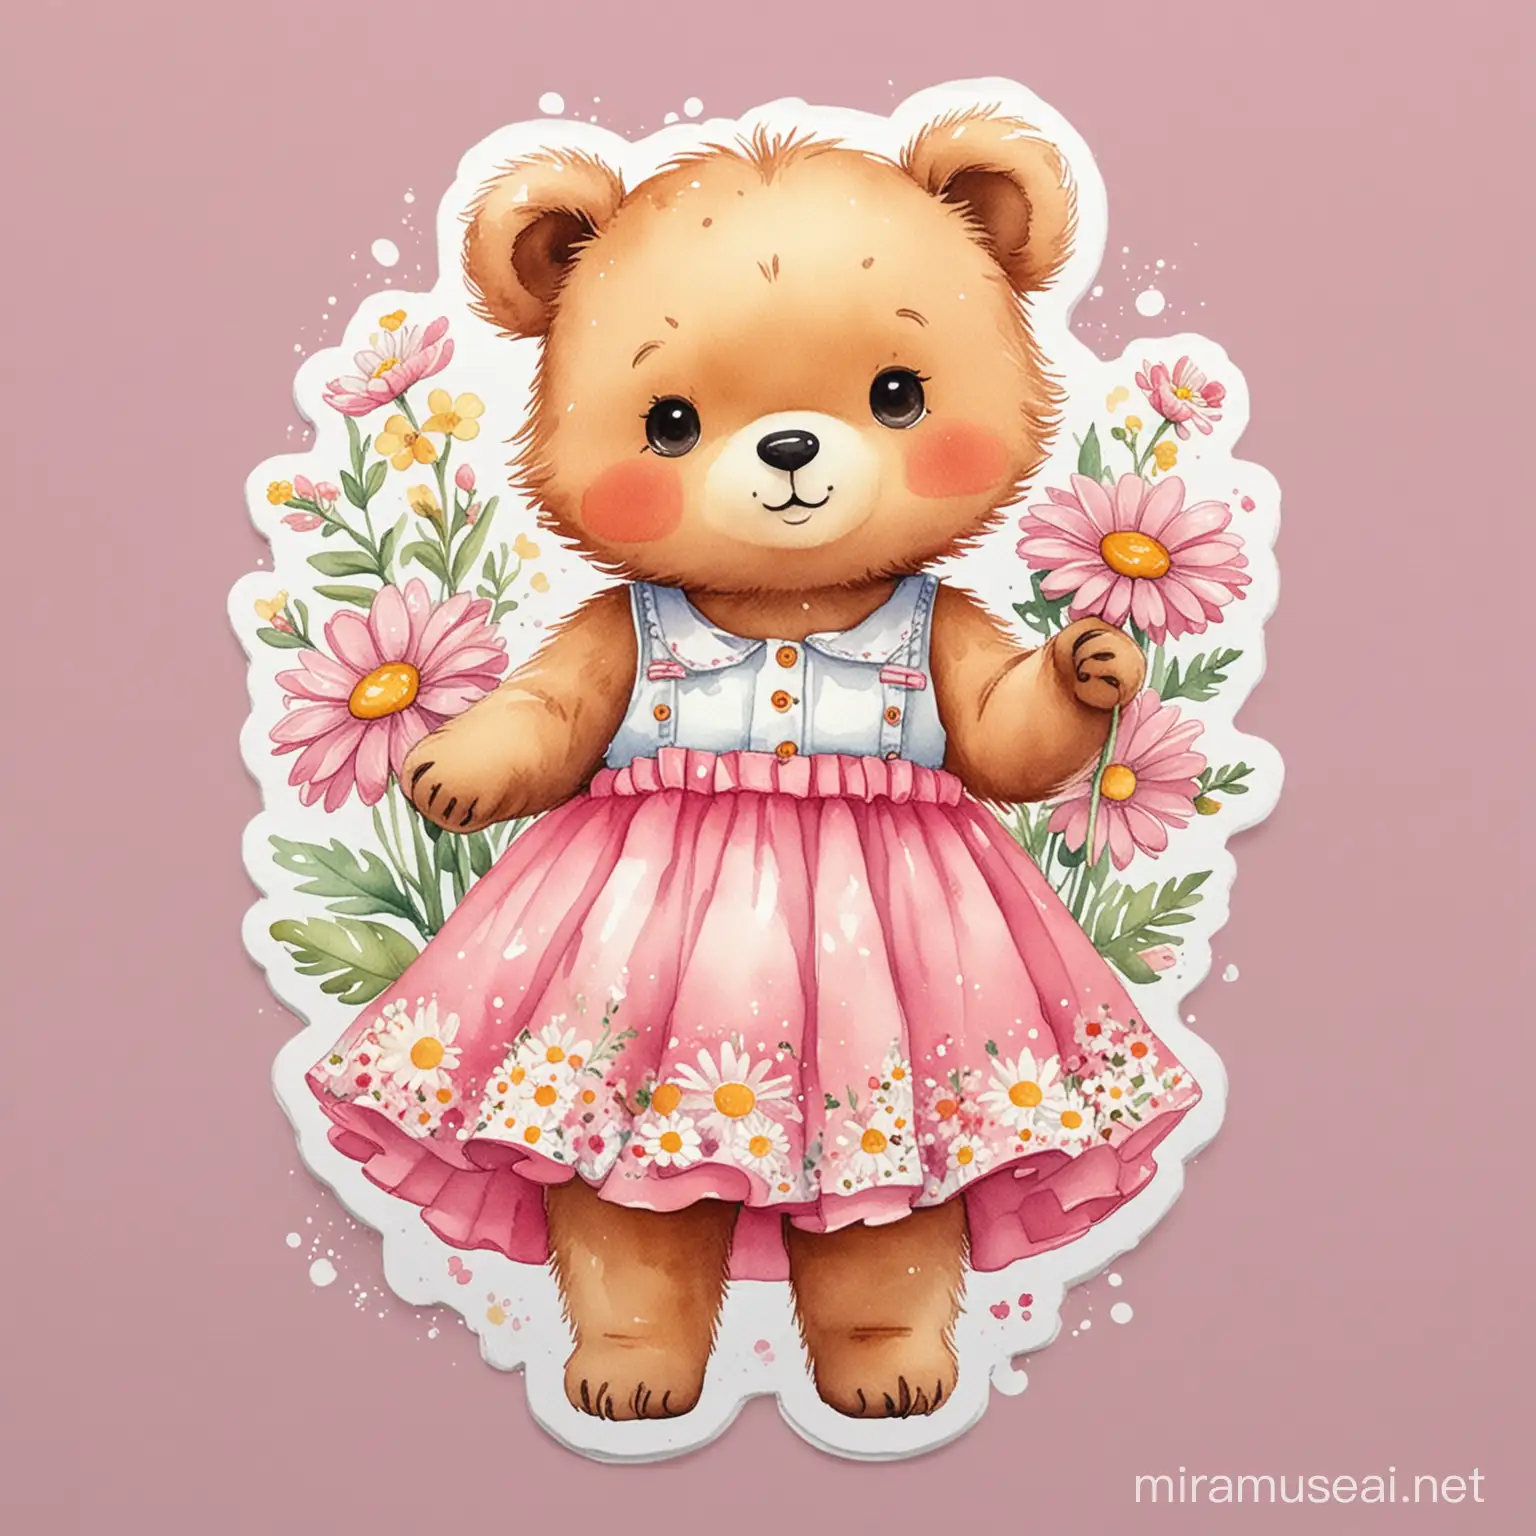 Adorable Female Bear Watercolor Illustration with Pink Skirt and Daisy Flowers